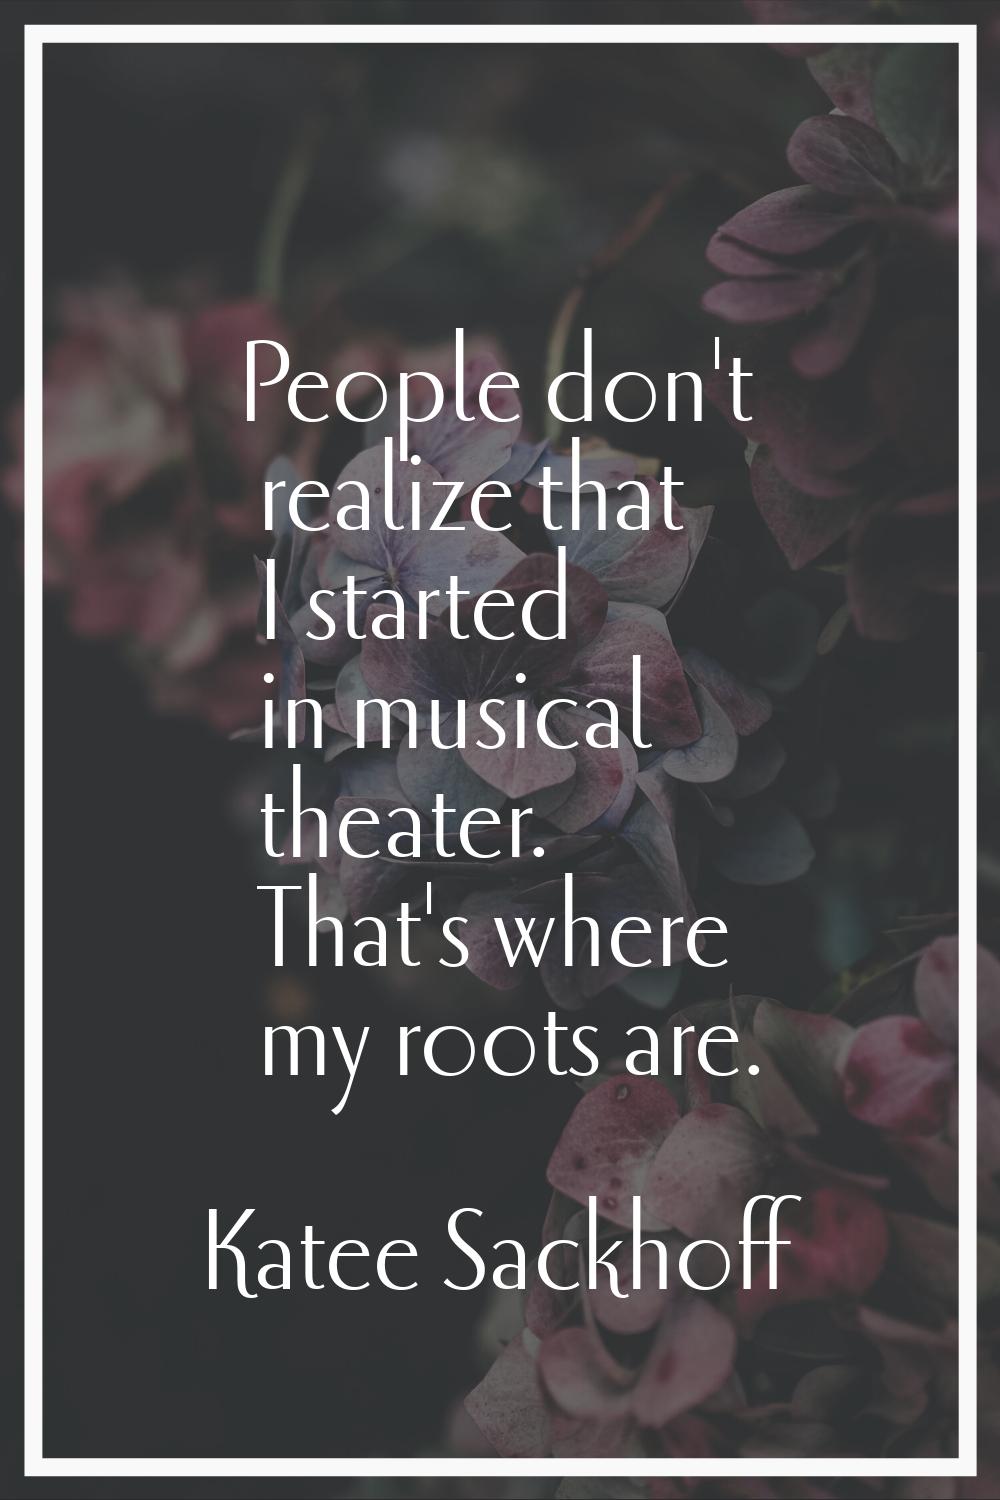 People don't realize that I started in musical theater. That's where my roots are.